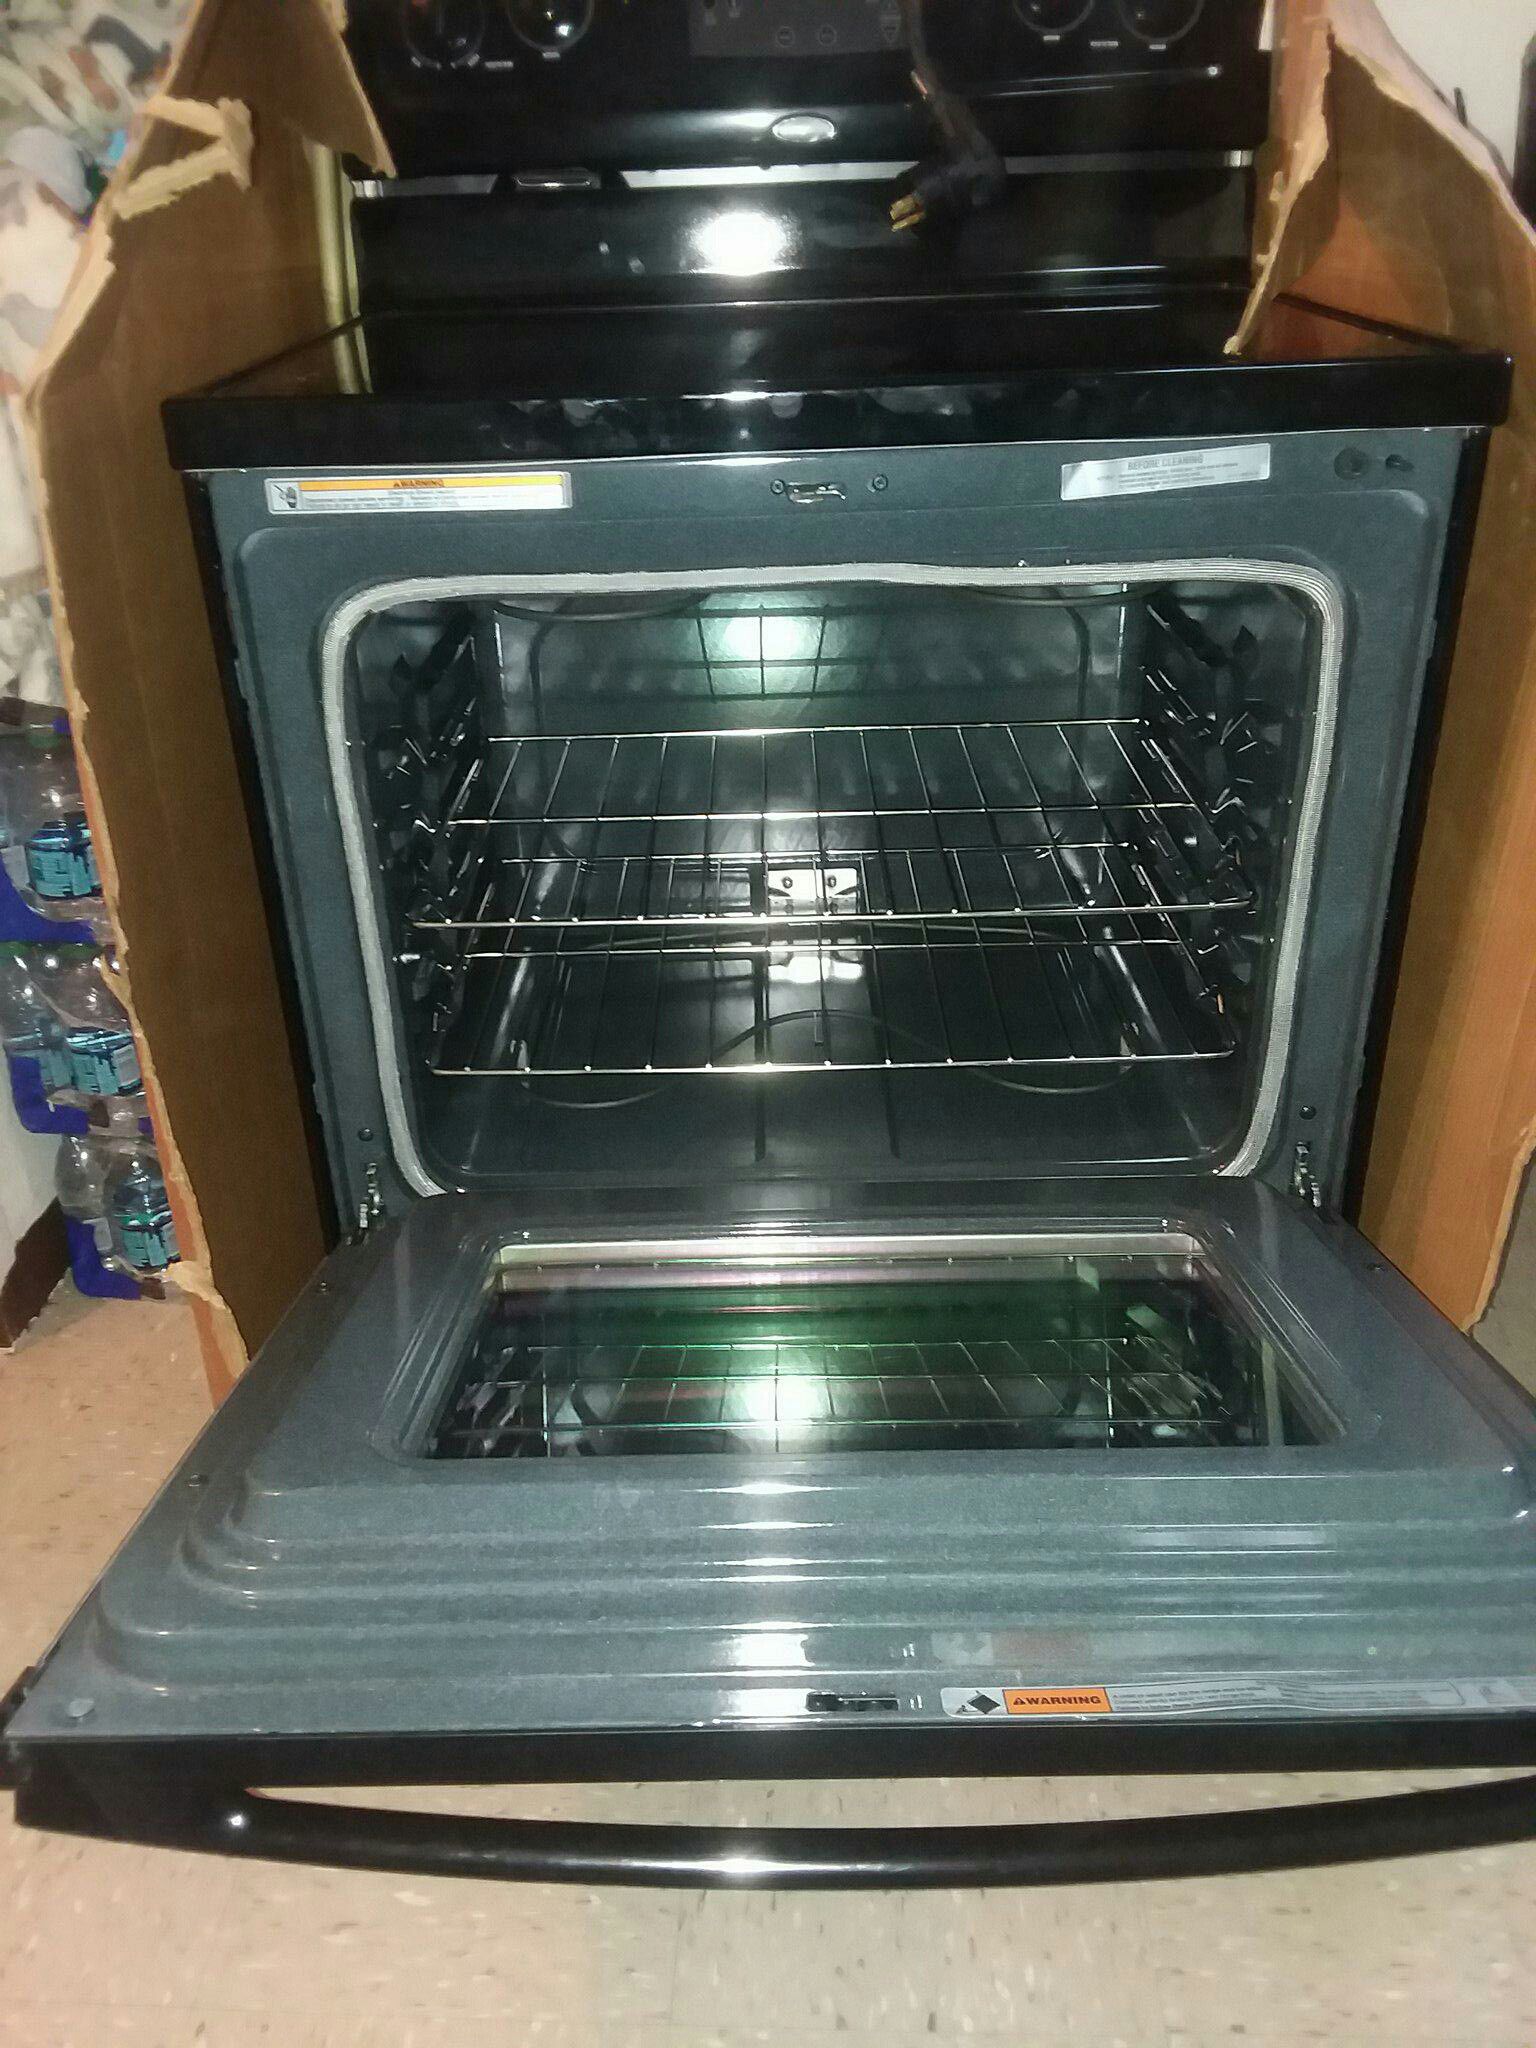 It's a self clean stove 220vlt brand new In box never used it's black need to sell it